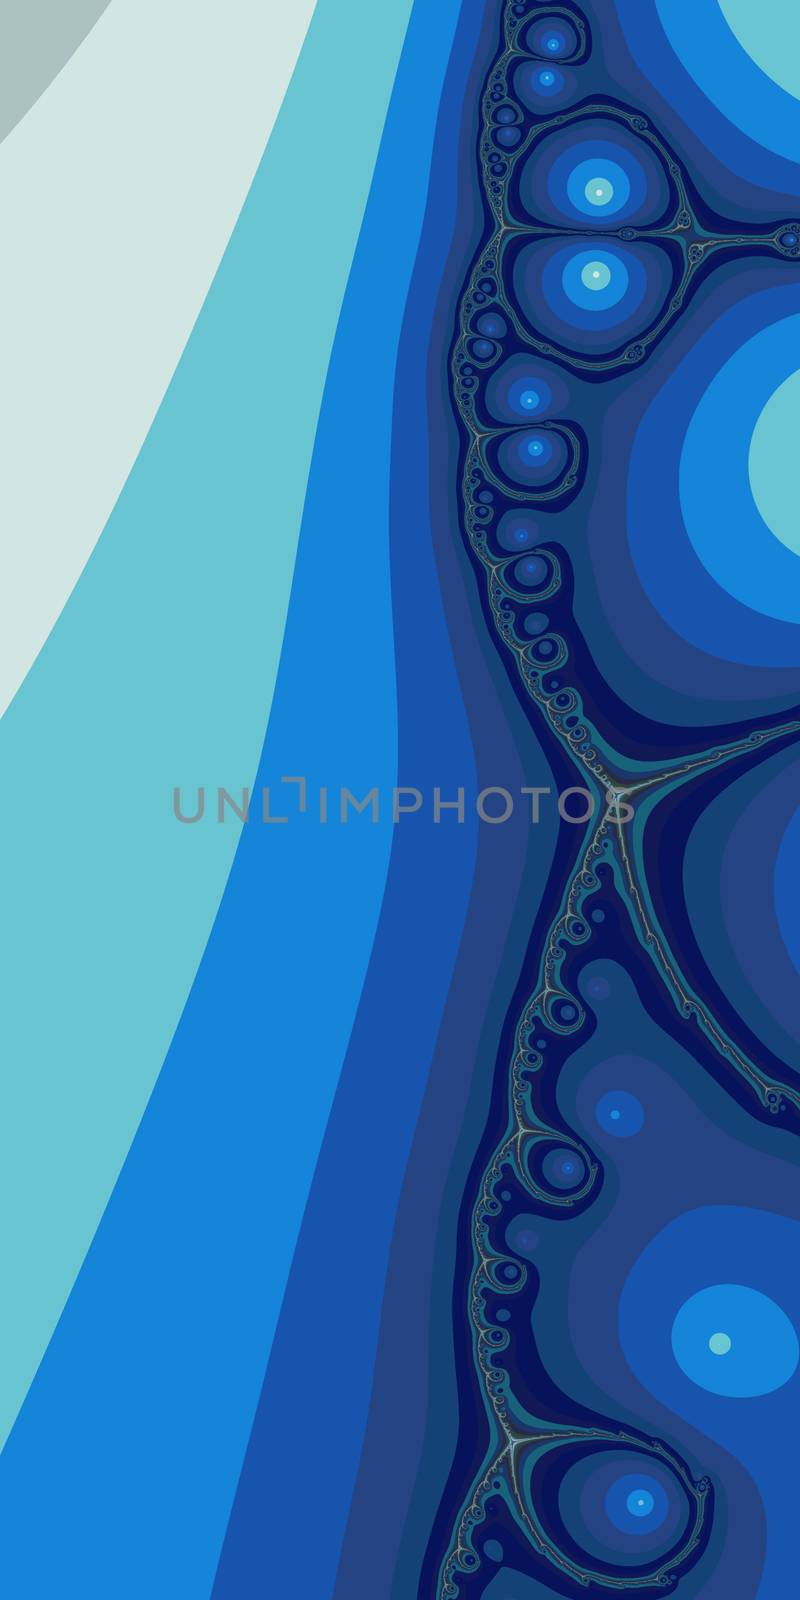 An abstract fractal design representing an interweaving ocean shoreline with foam bubbles in hues of blue.